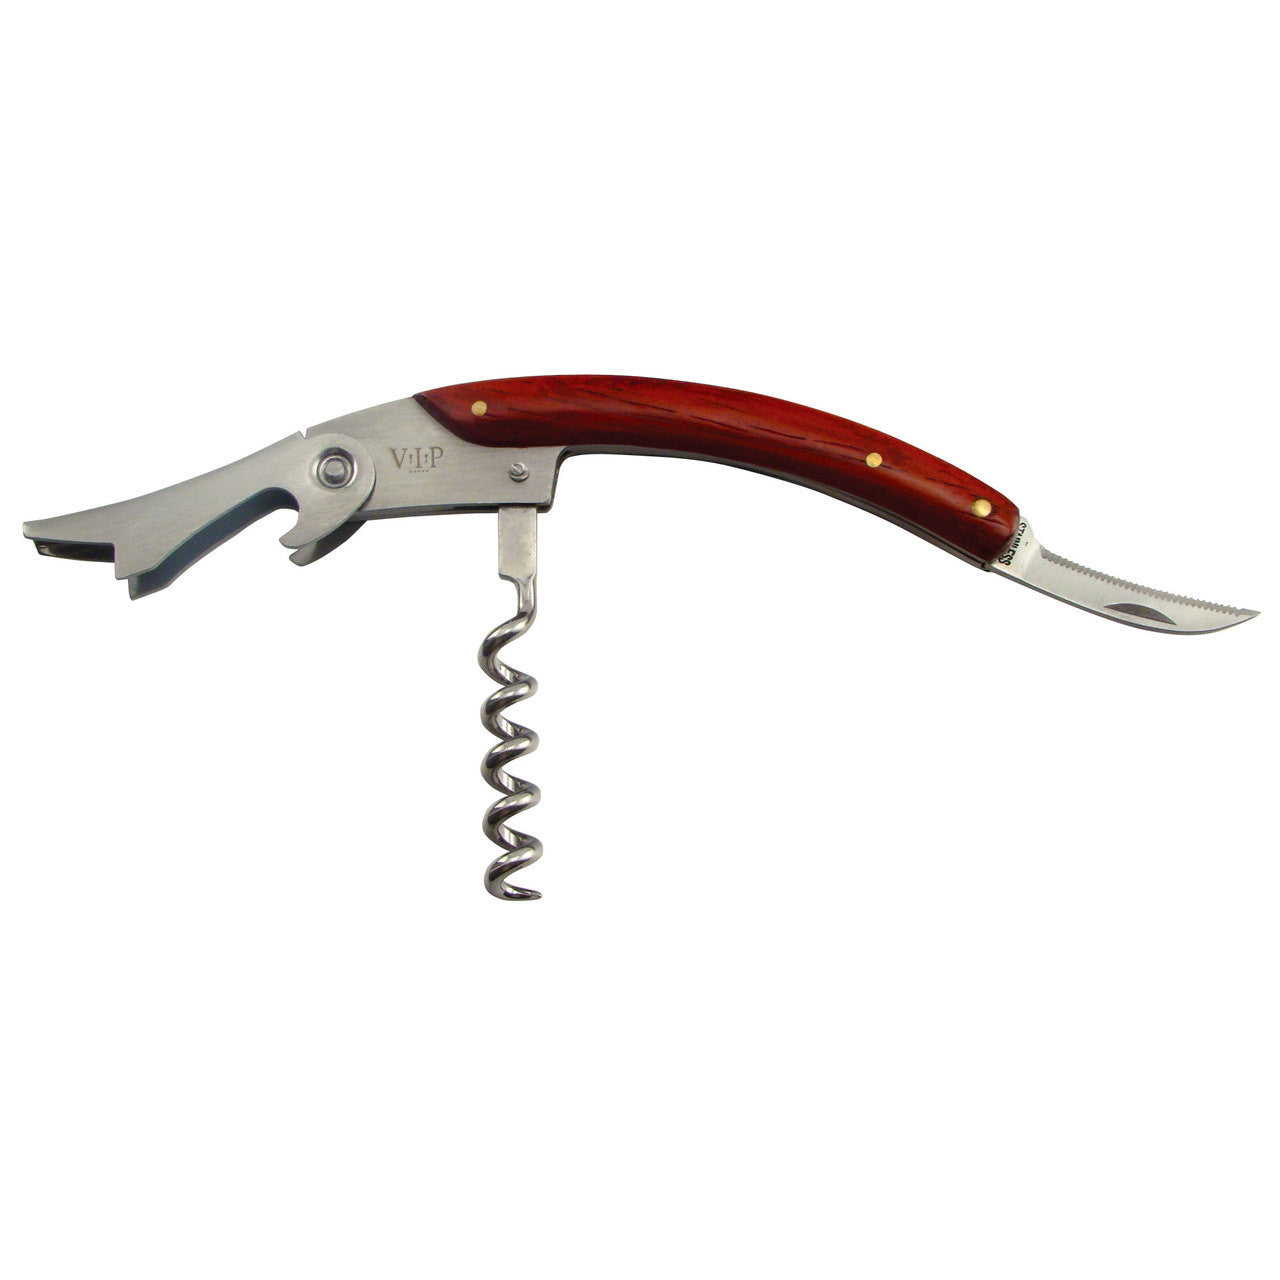 Stainless Steel Wine Corkscrew With Wood Handles in Gift Box - Humidors Wholesaler